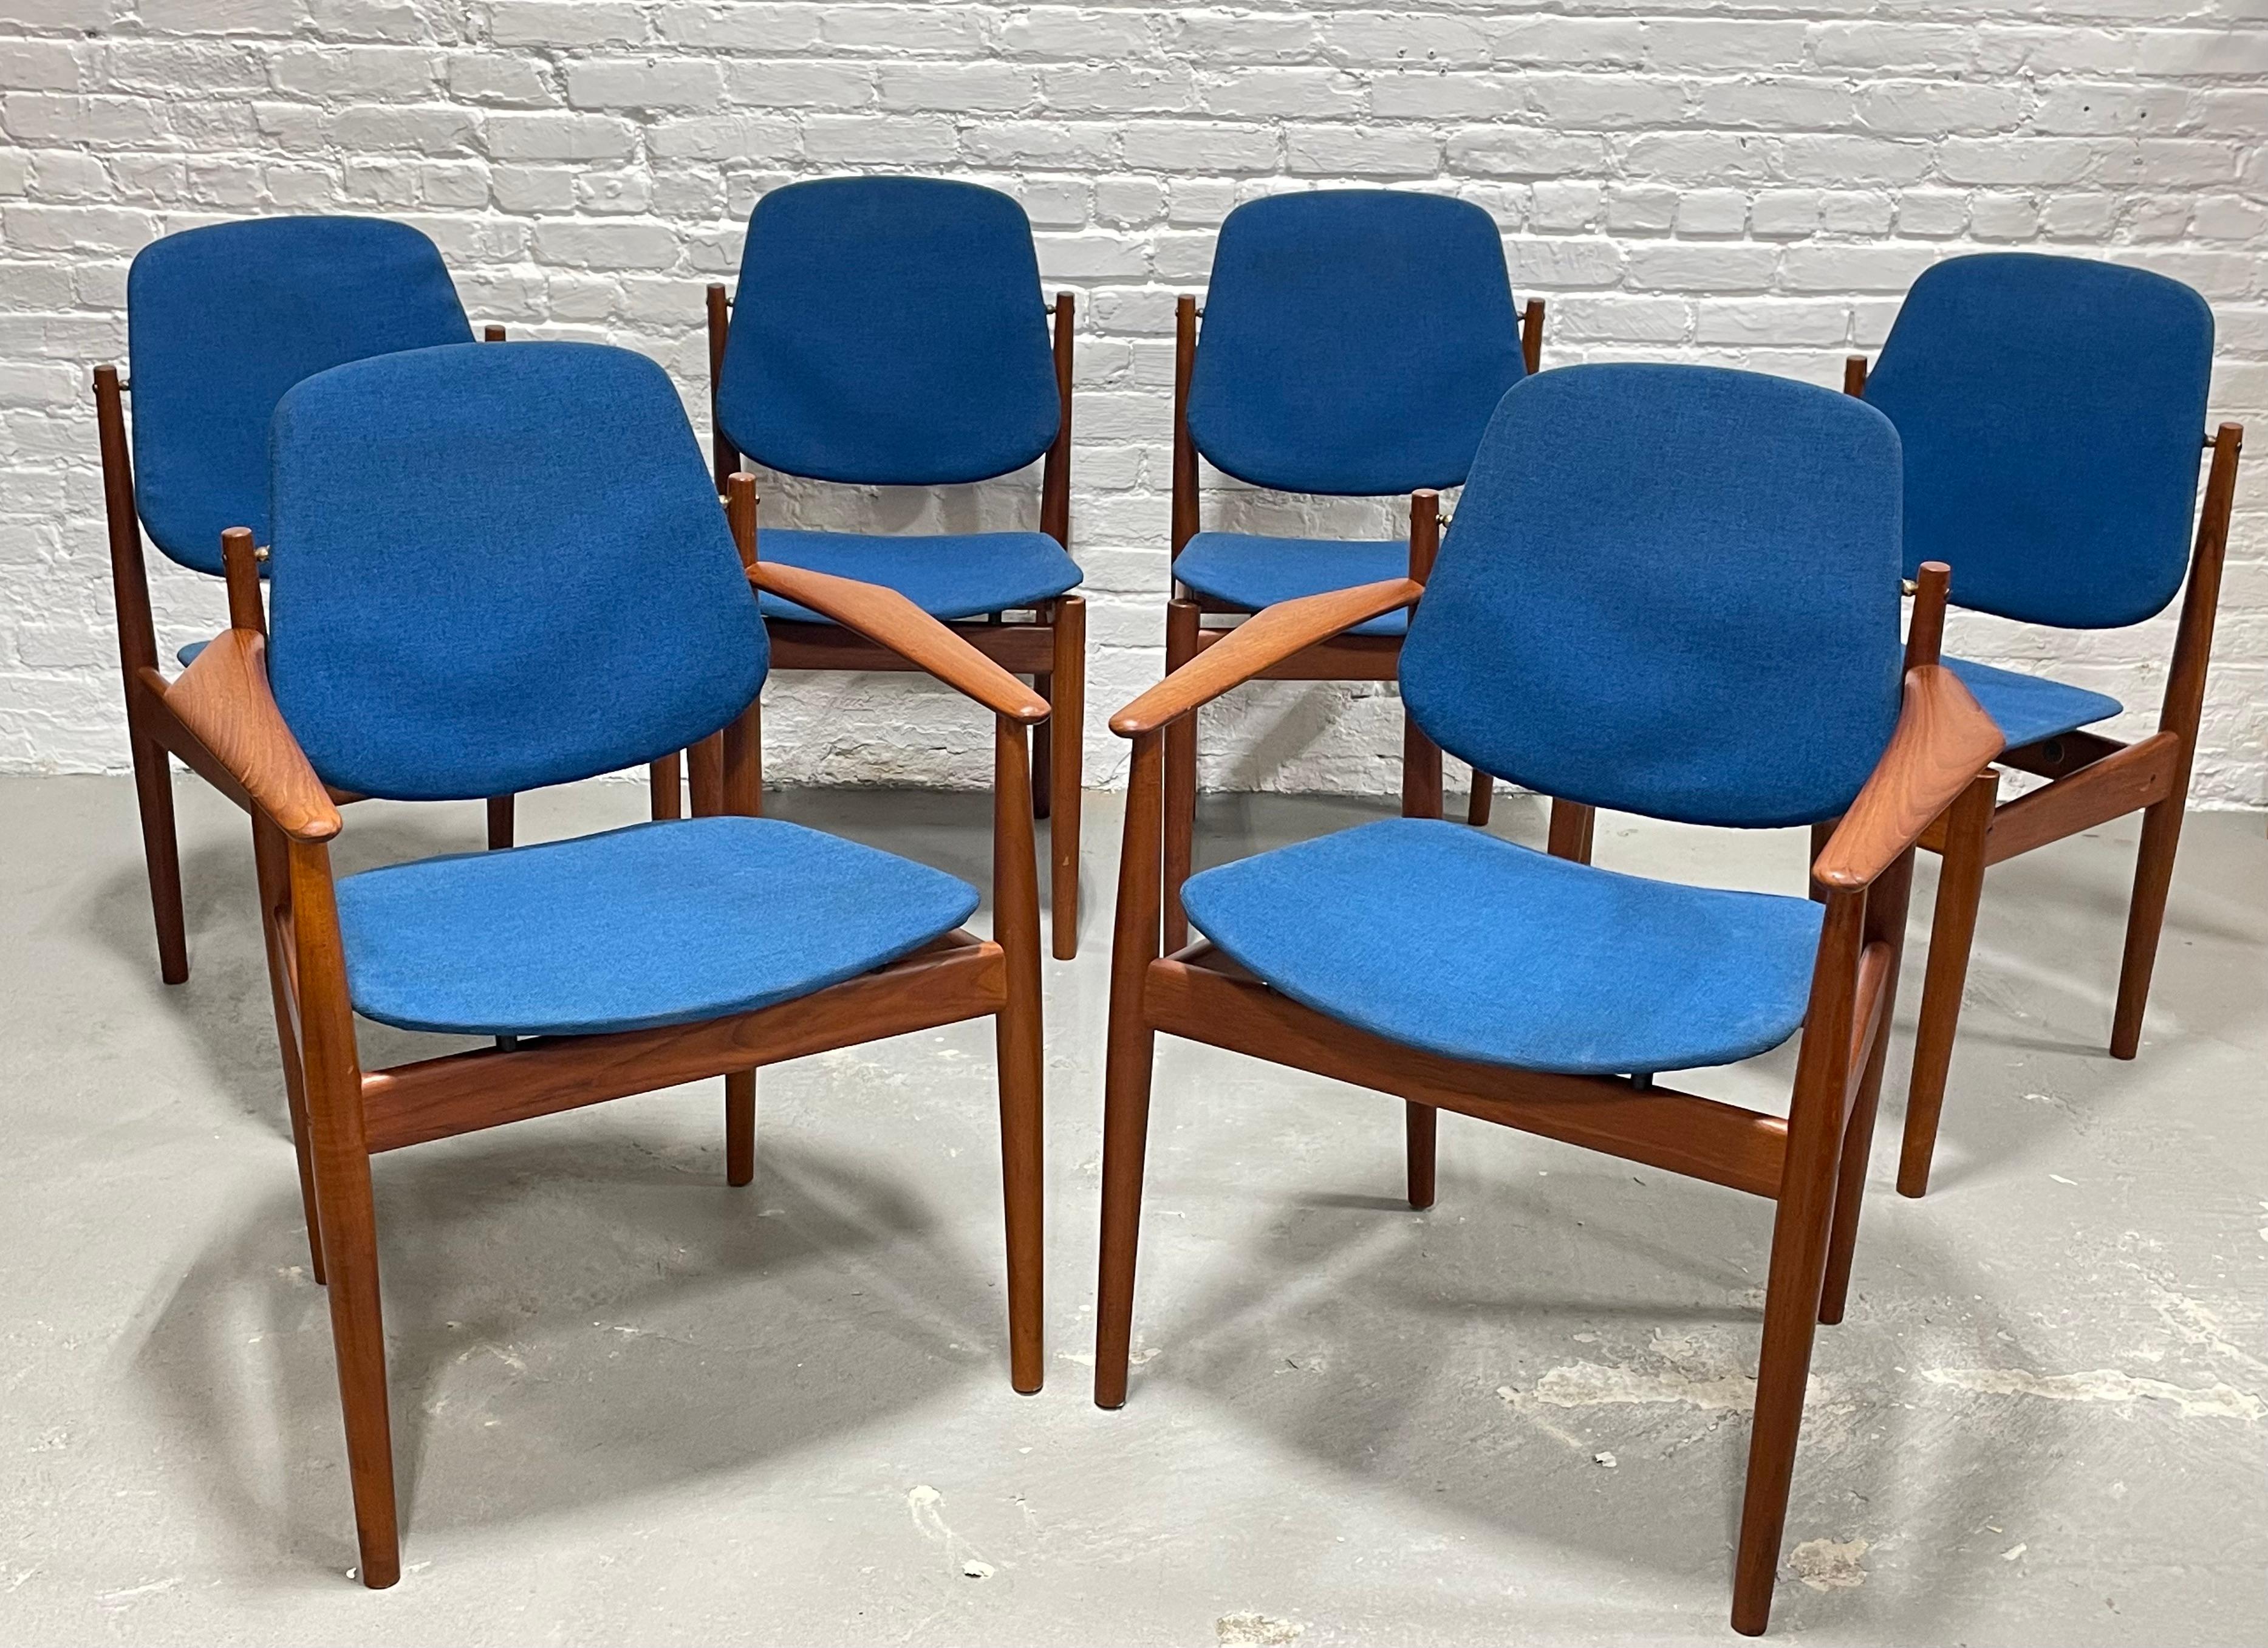 Rare and incredible set of six Mid-Century Modern Danish teak model 203 dining chairs by Arne Vodder for France & Daverkosen. These chairs are showstoppers from every angle. The stunning teak wood features incredible wood grains and are freshly